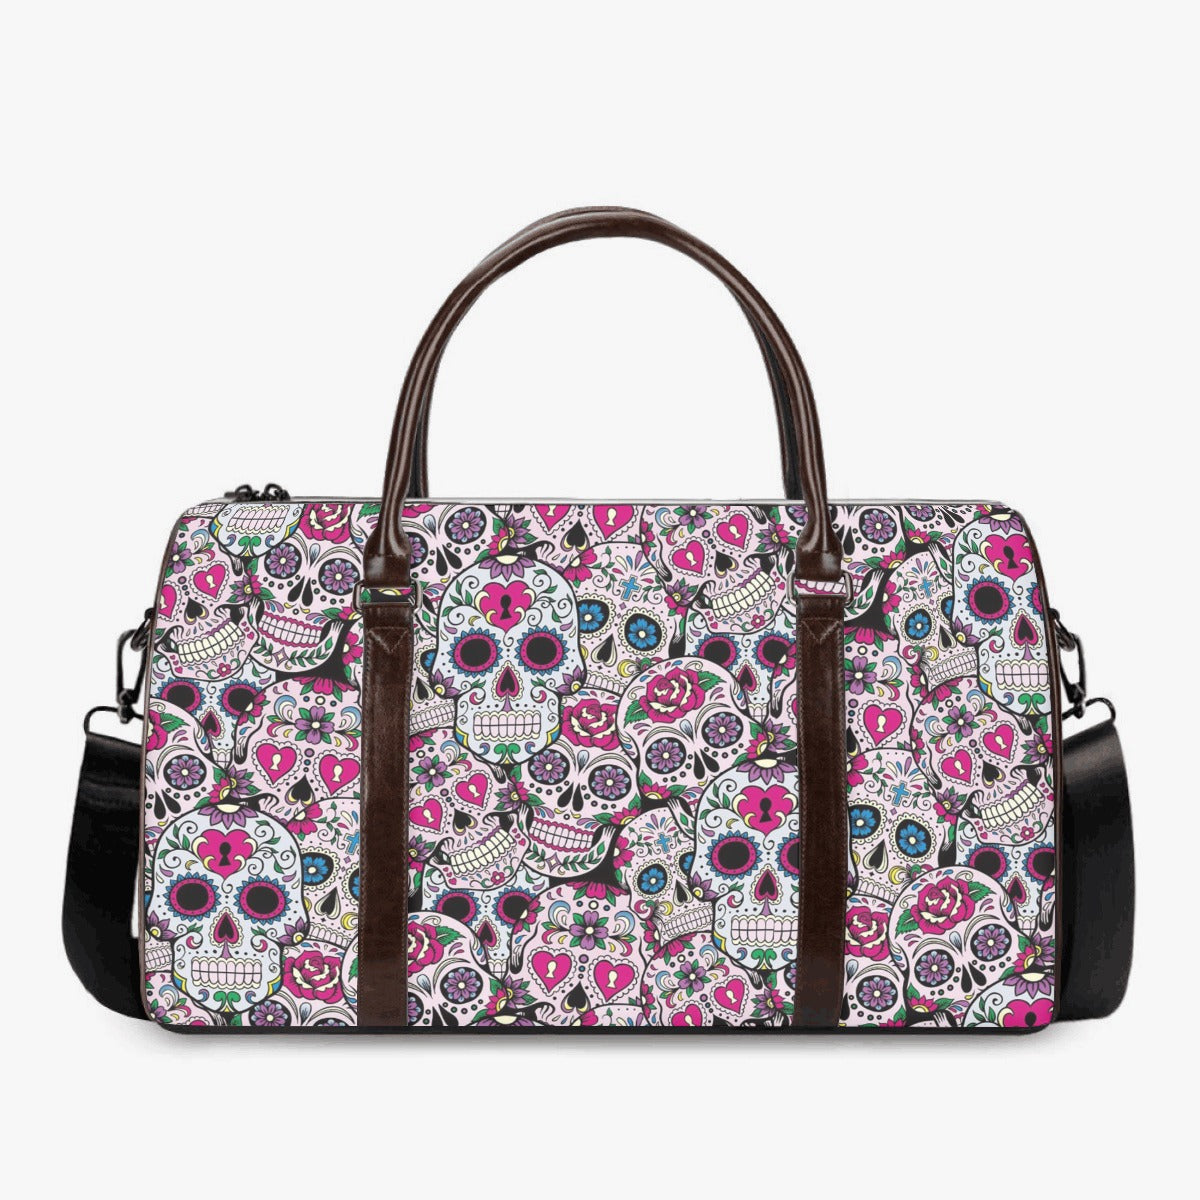 Cinco de mayo skull Canvas Weekend Travel Bag, day of the dead Carry On Bag, floral sugar skull Canvas Weekend Travel Bag, cinco de mayo skull bag